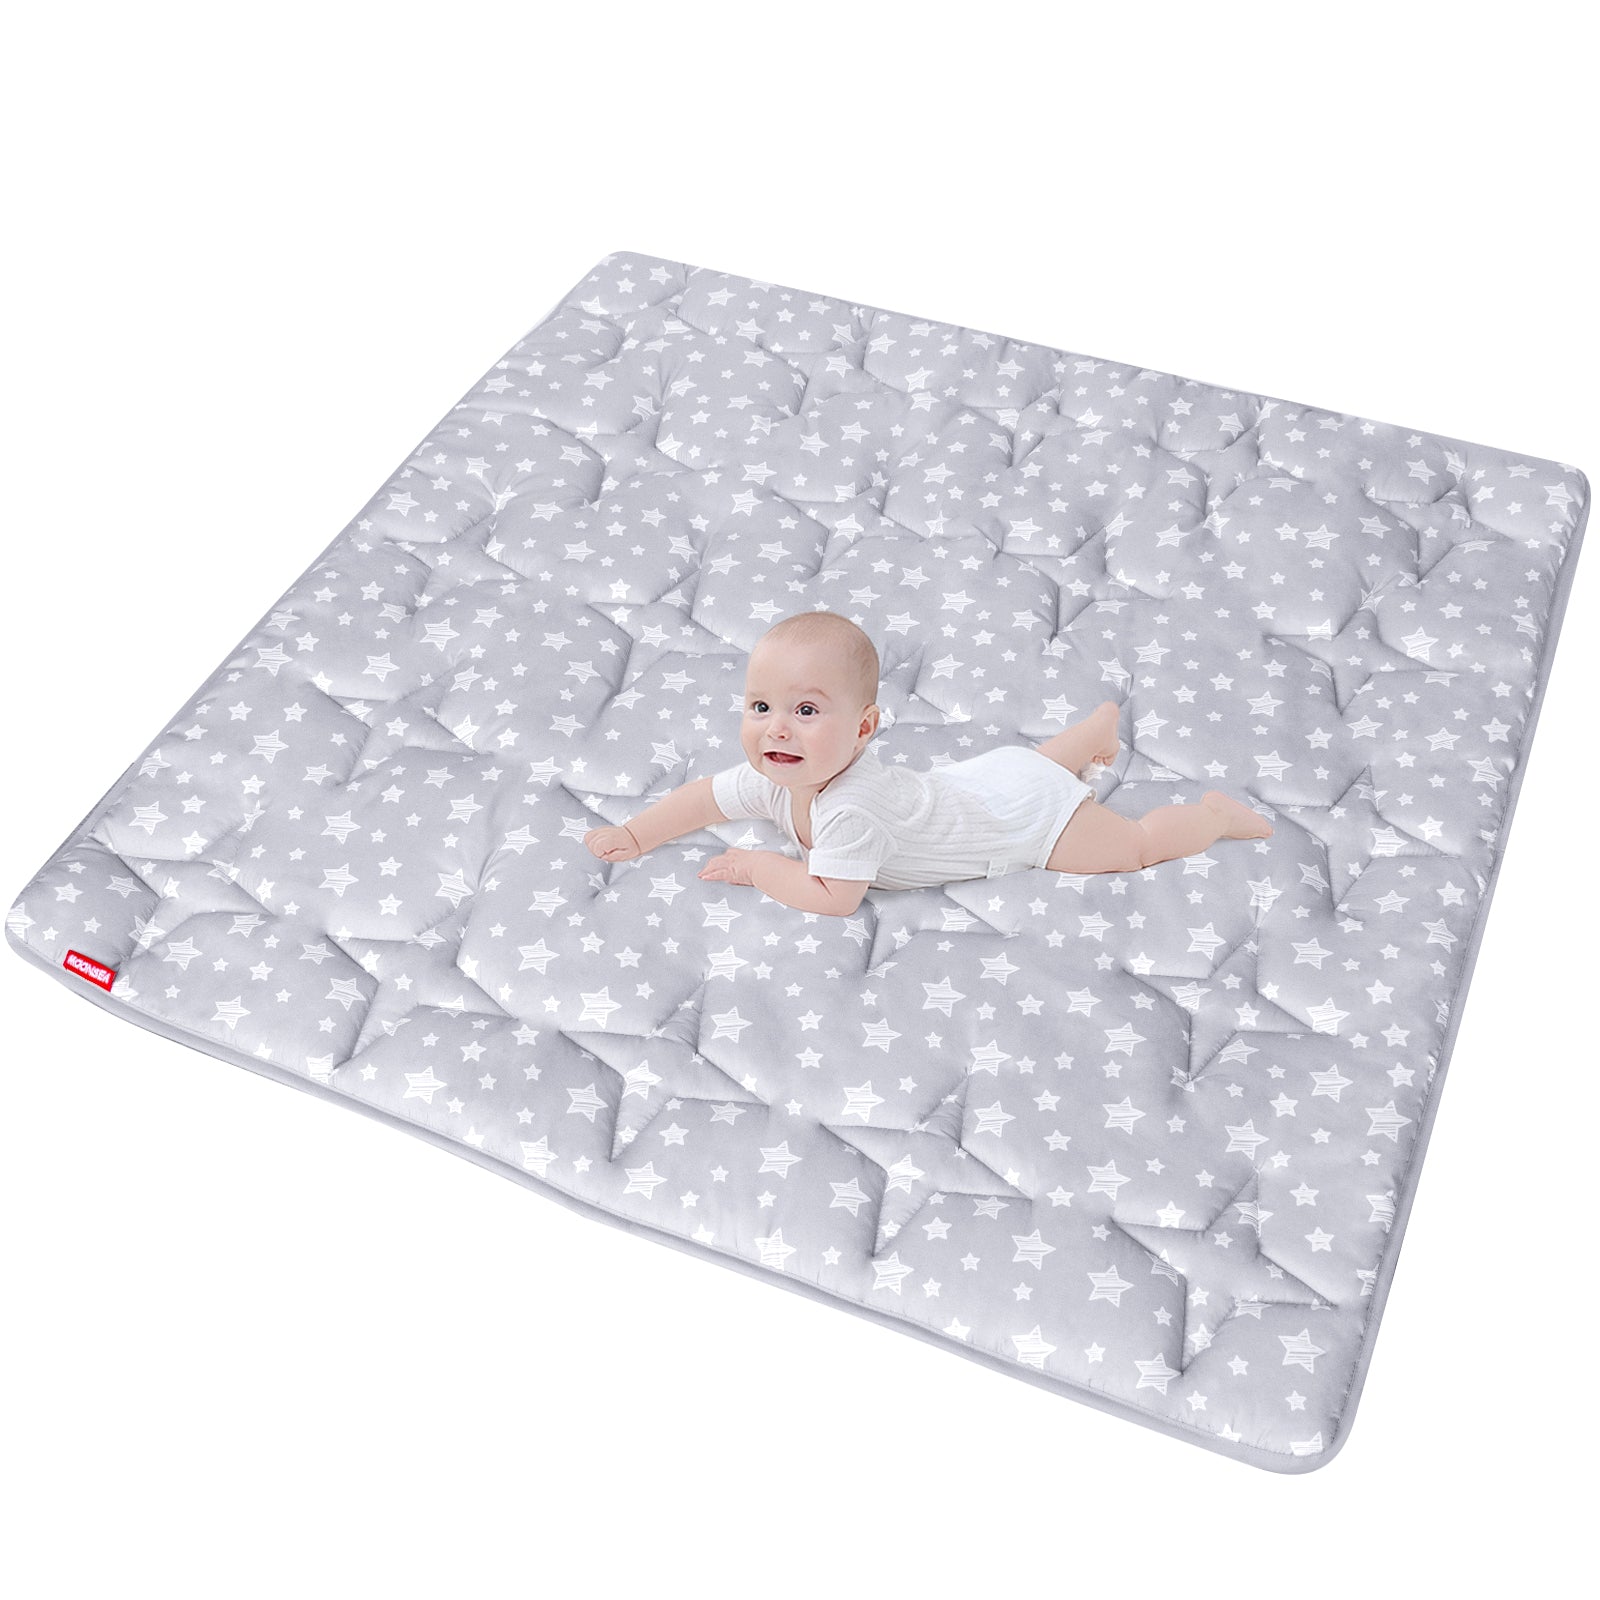 Baby Play Mat | Playpen Mat - 59" x 59", Large Padded Tummy Time Activity Mat for Infant & Toddler, Grey Star - Moonsea Online Store